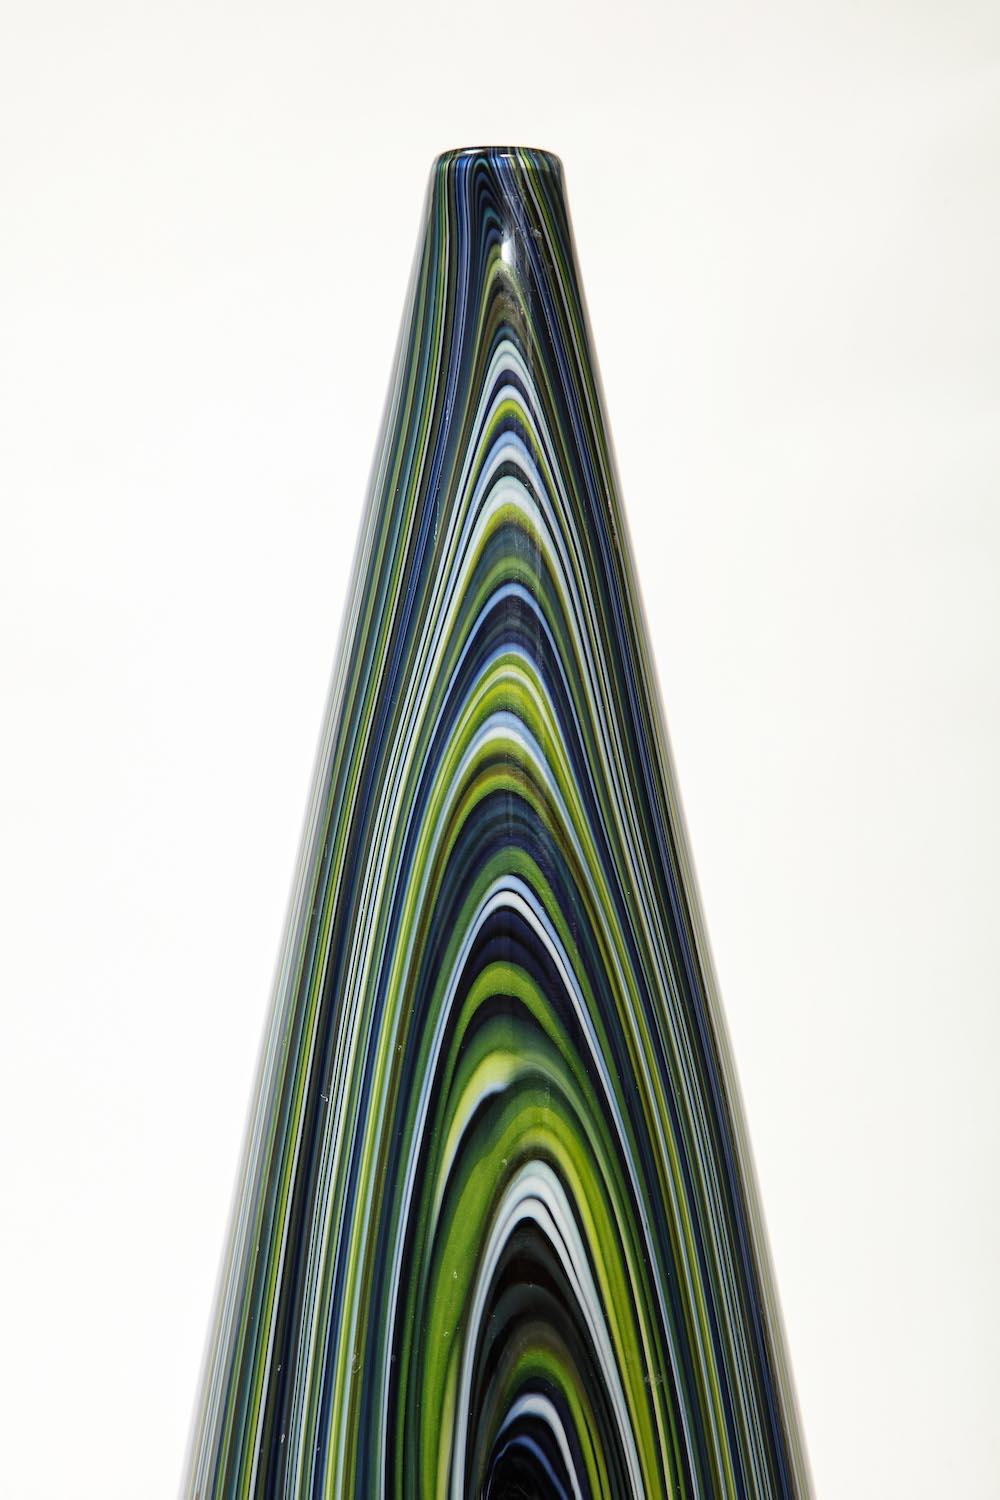 Italian Hand-Blown Vase by Mario Ticco for VeArt For Sale